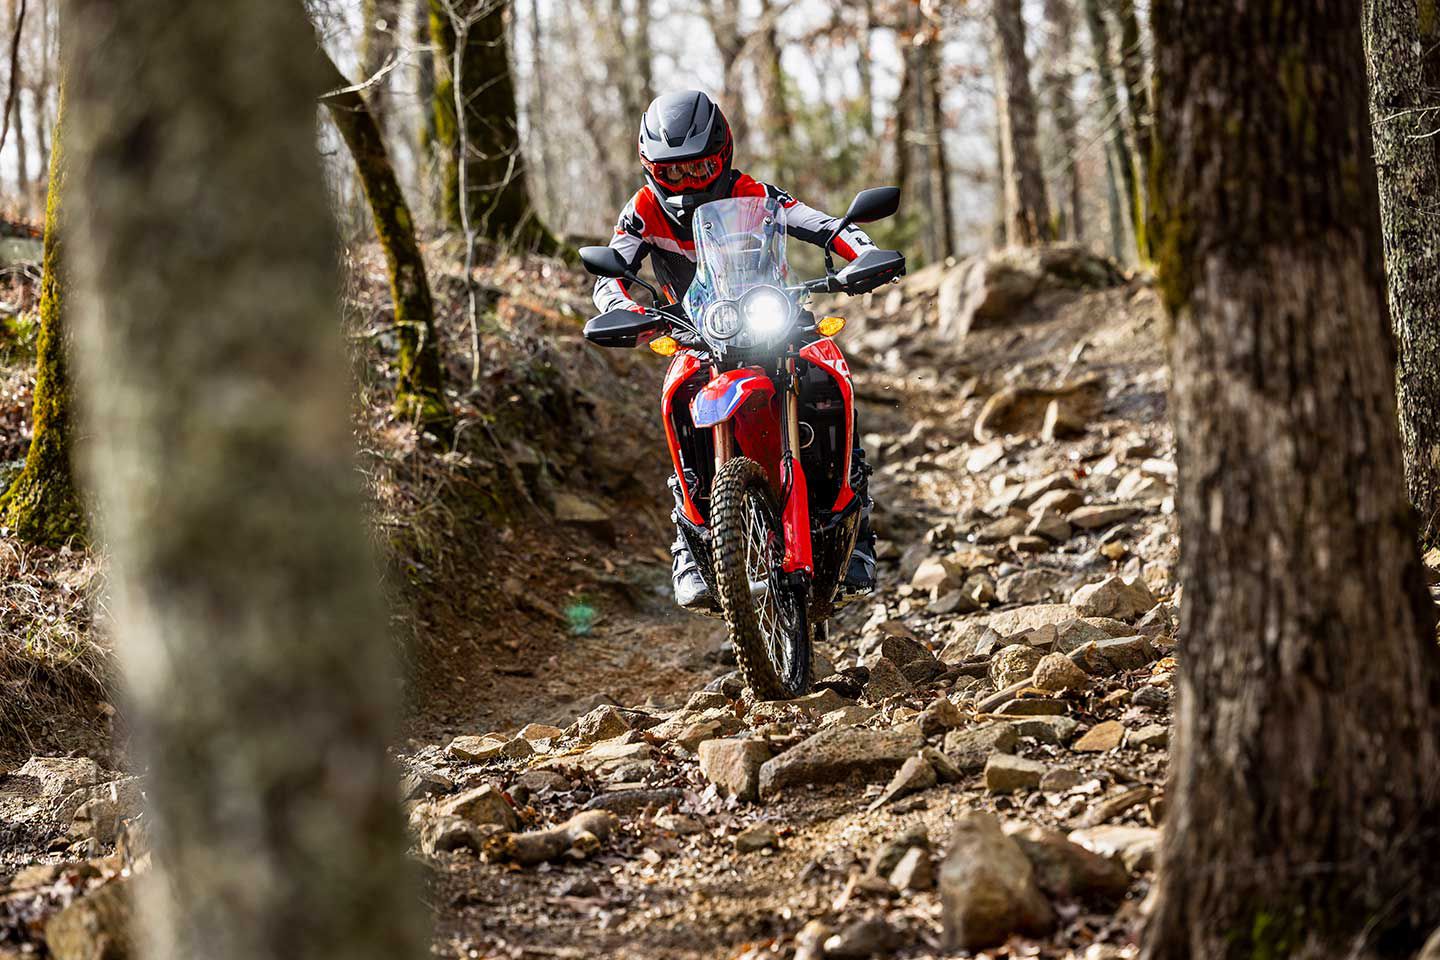 A 21-inch front wheel helps the CRF300L Rally roll over obstacles on tricky terrain.